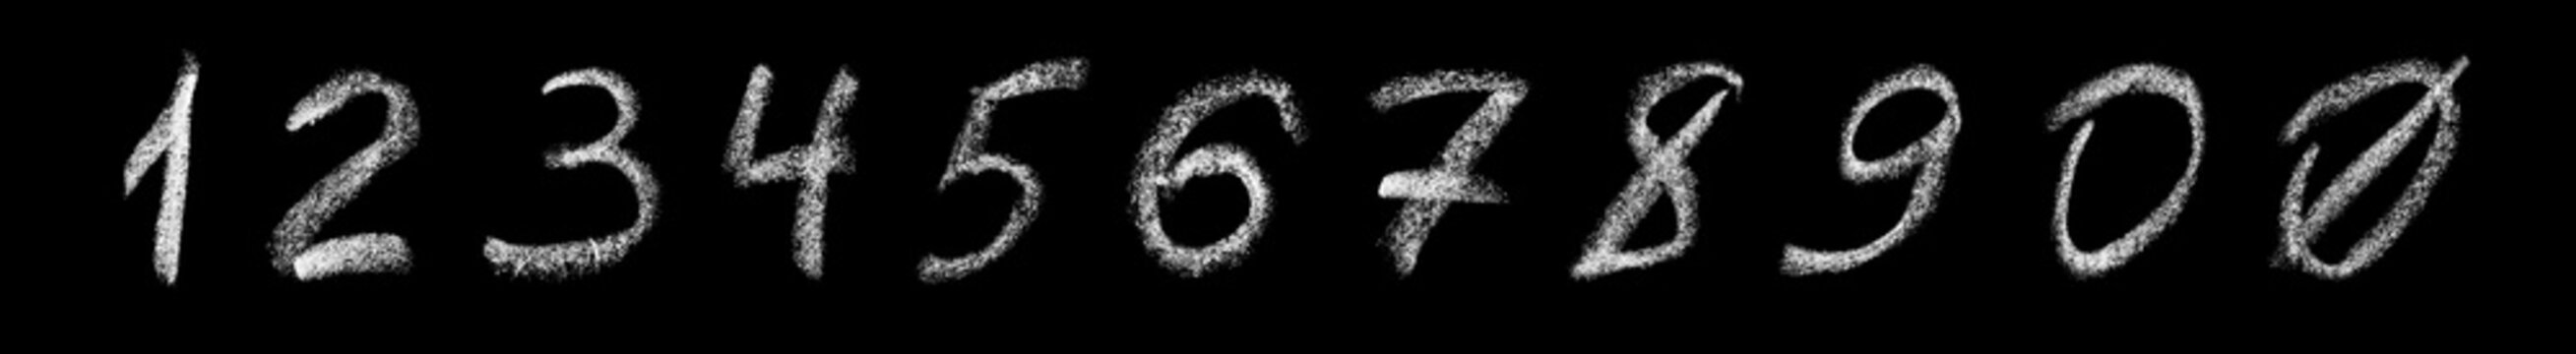 Set of arabic numbers handwritten in white chalk on a blackboard. Chalk numbers isolated on black background.